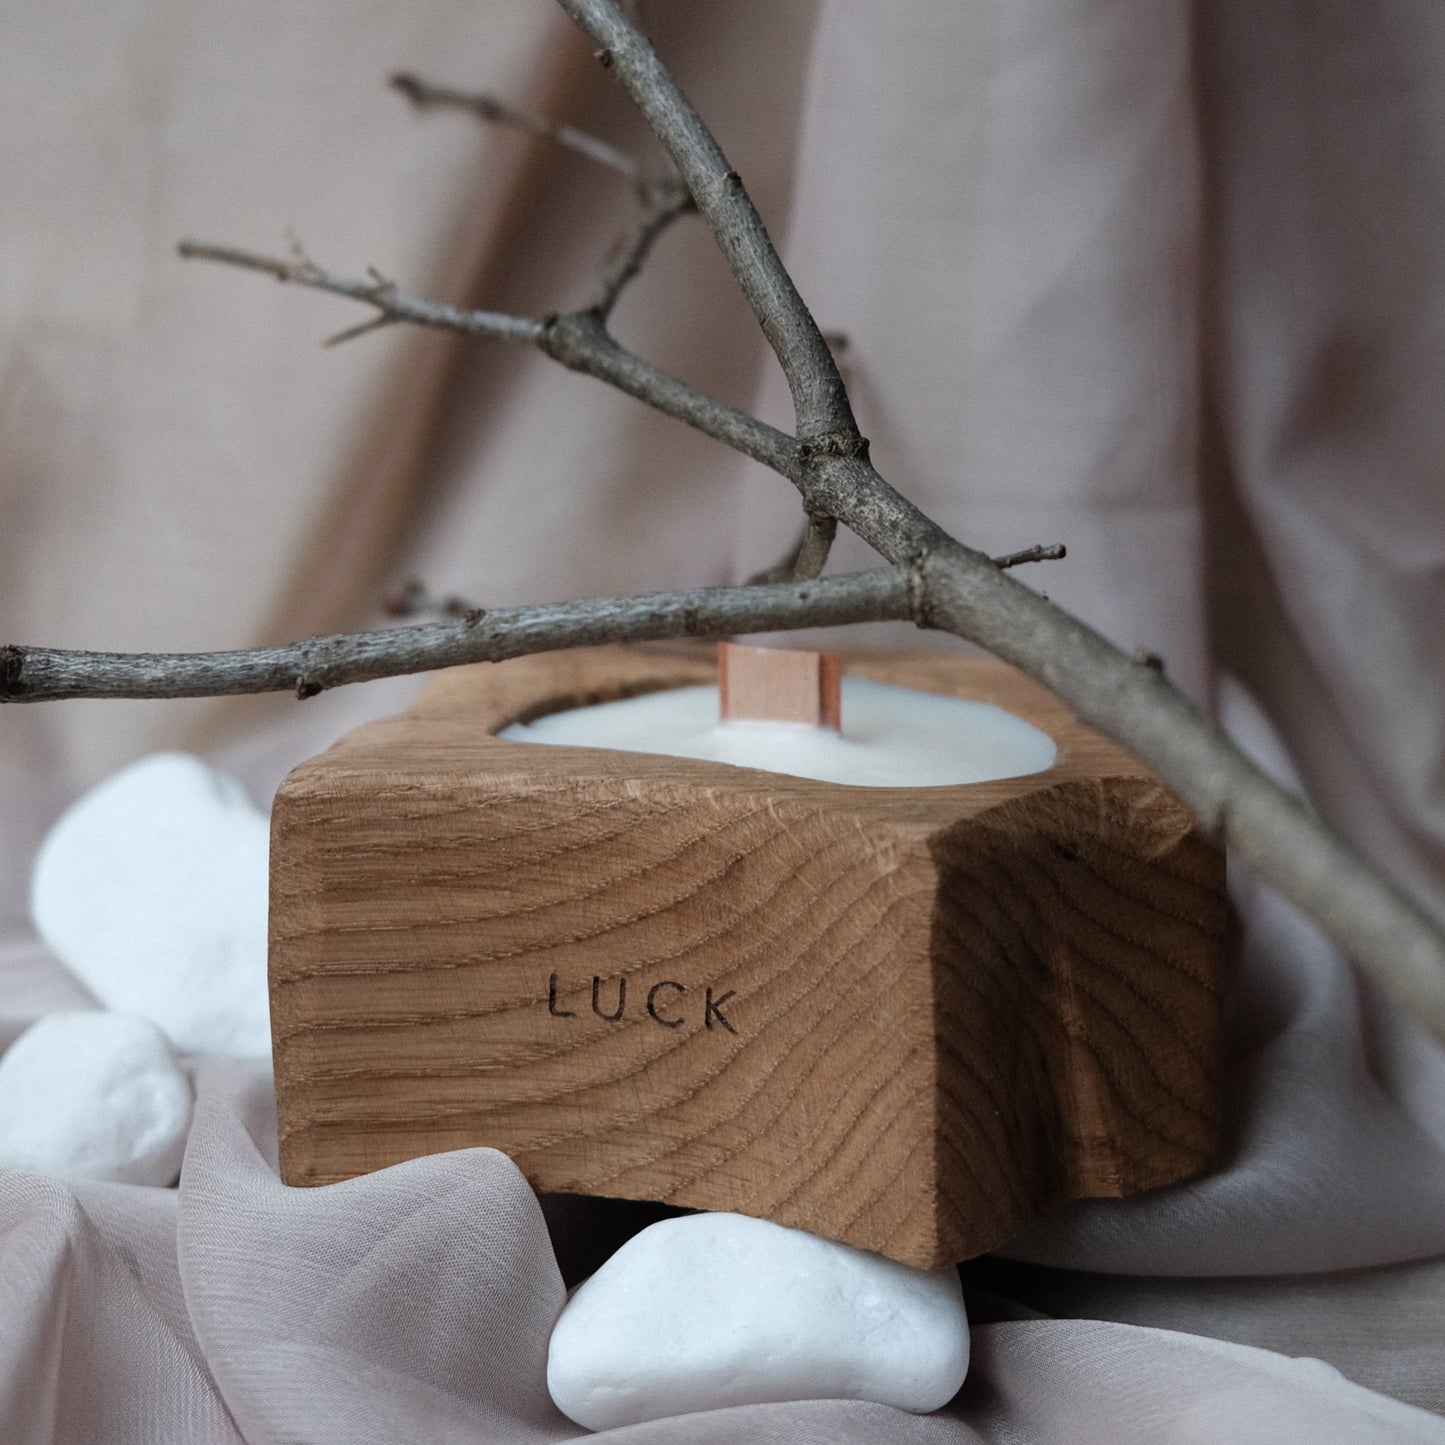 Exclusive aromatic candle in a wooden oak candlestick and a crackling wooden wick - LUCK.